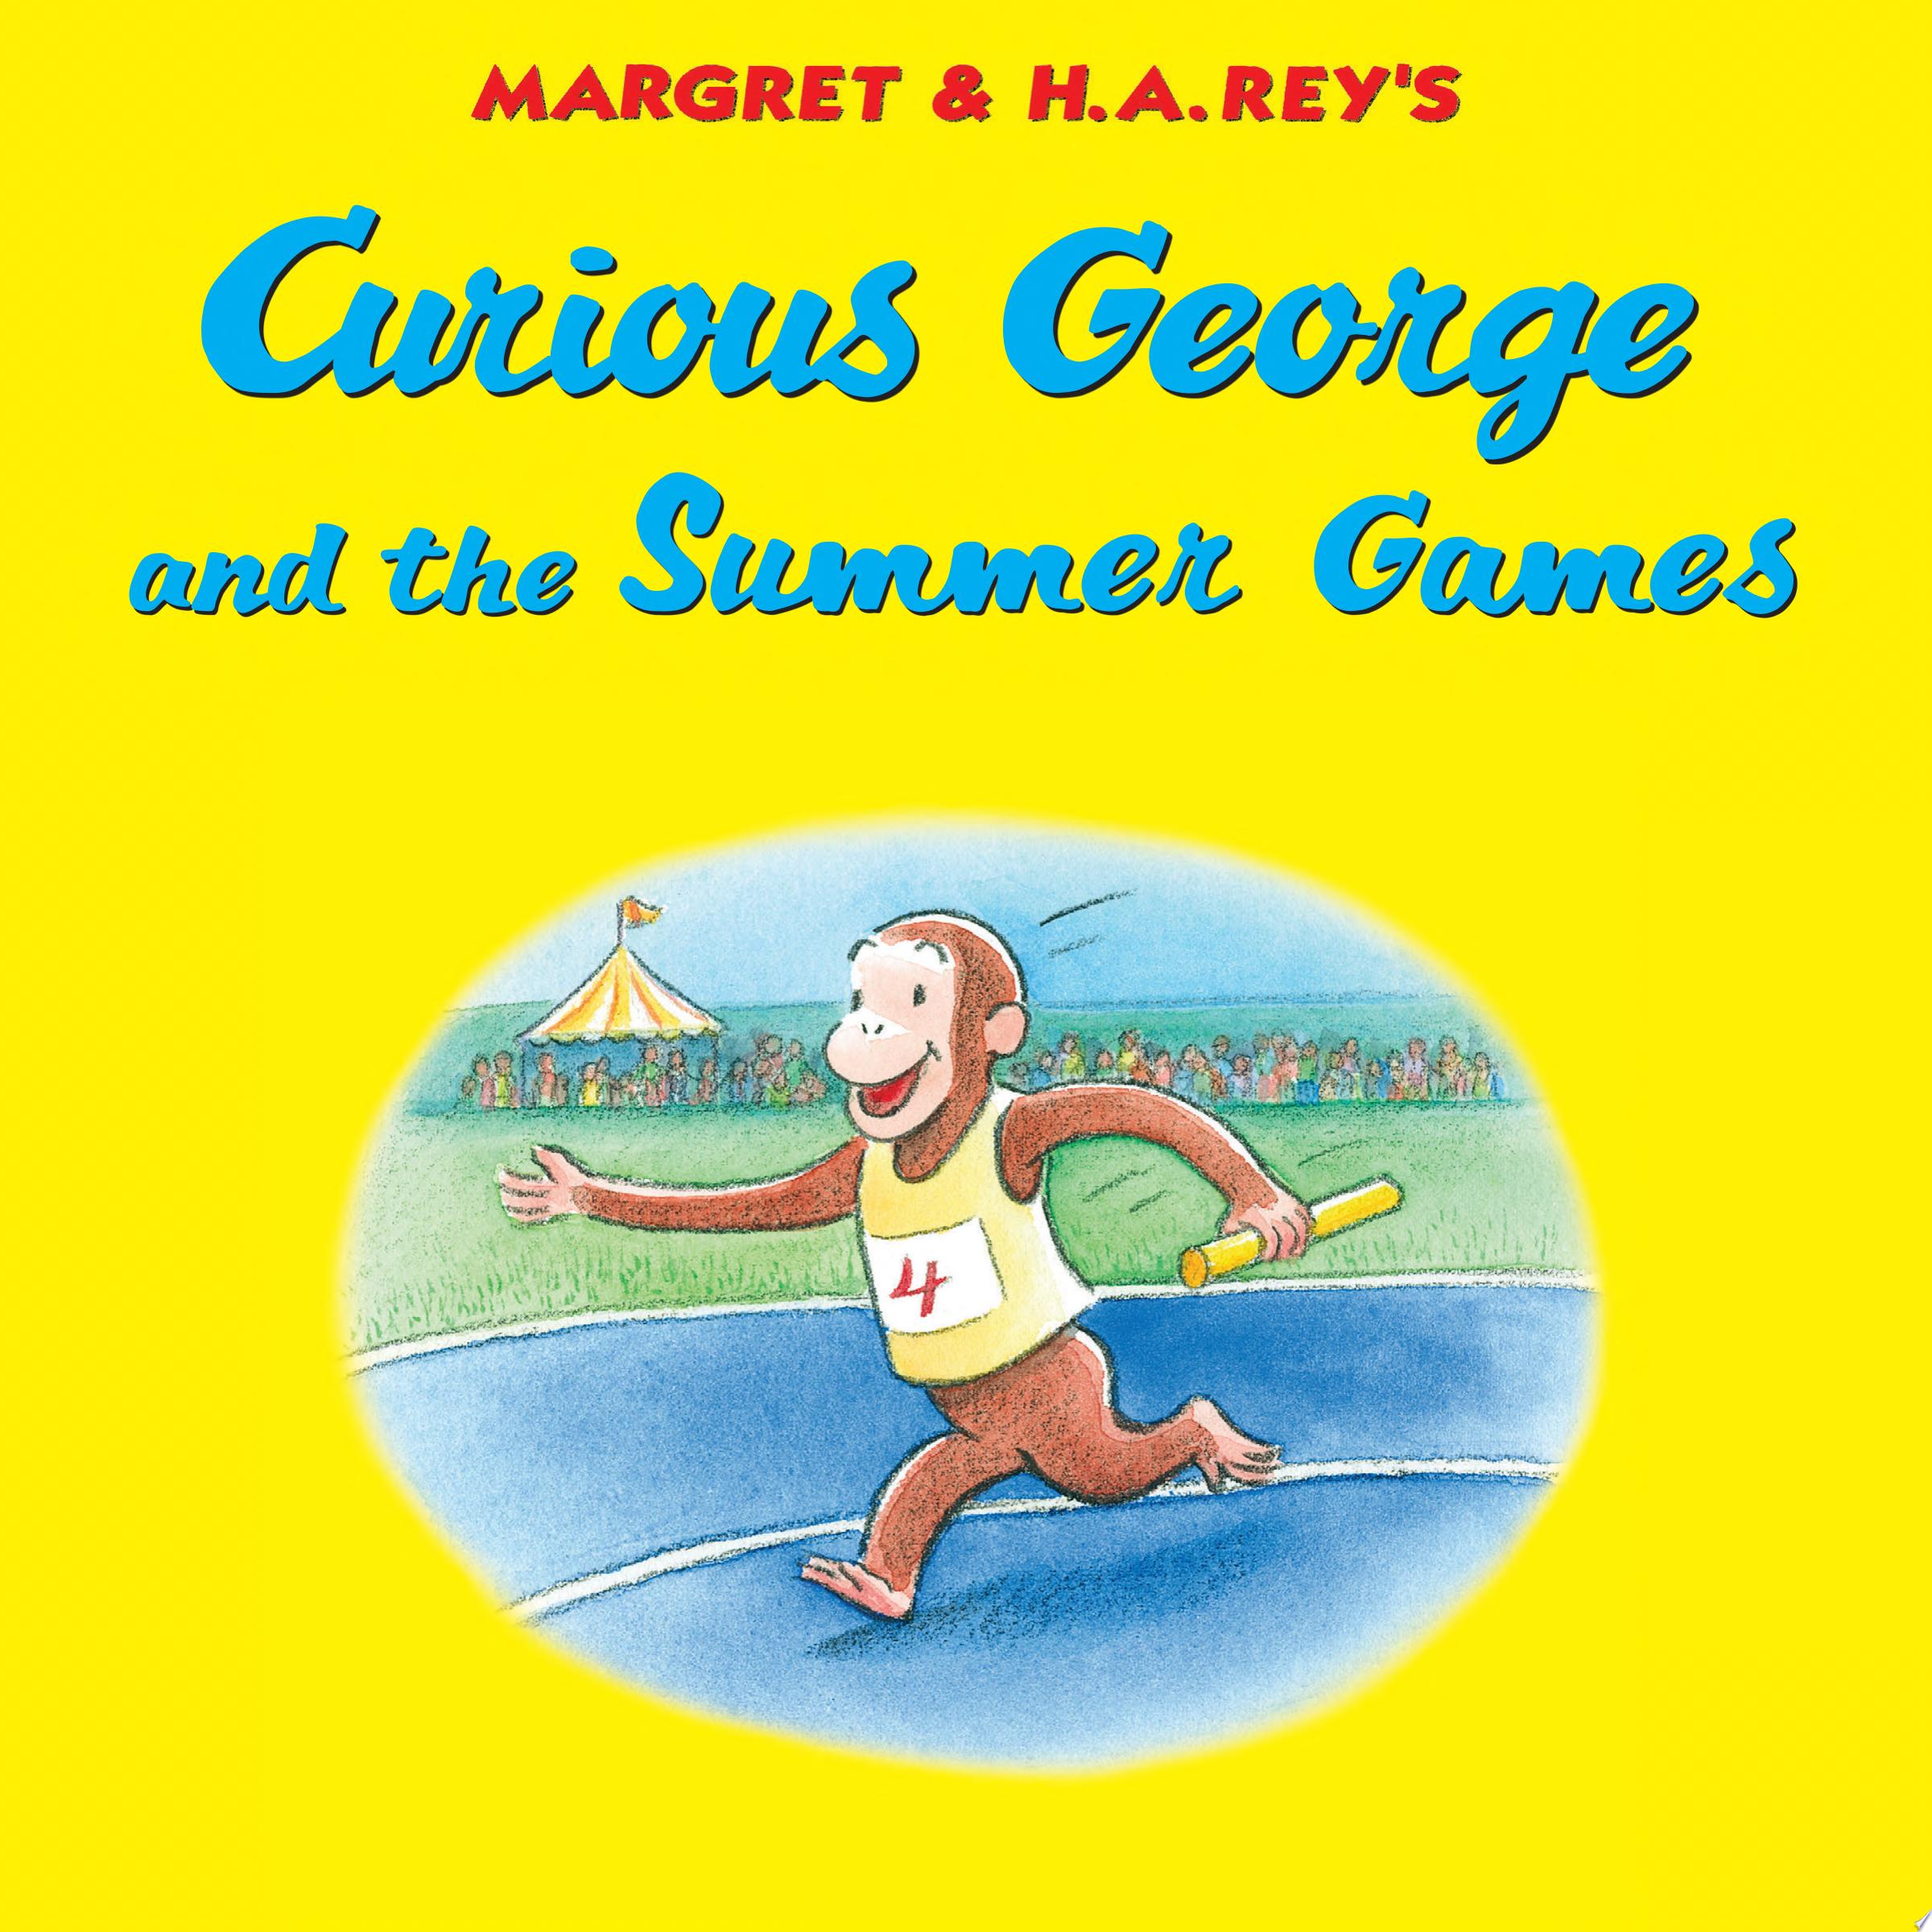 Image for "Curious George and the Summer Games"